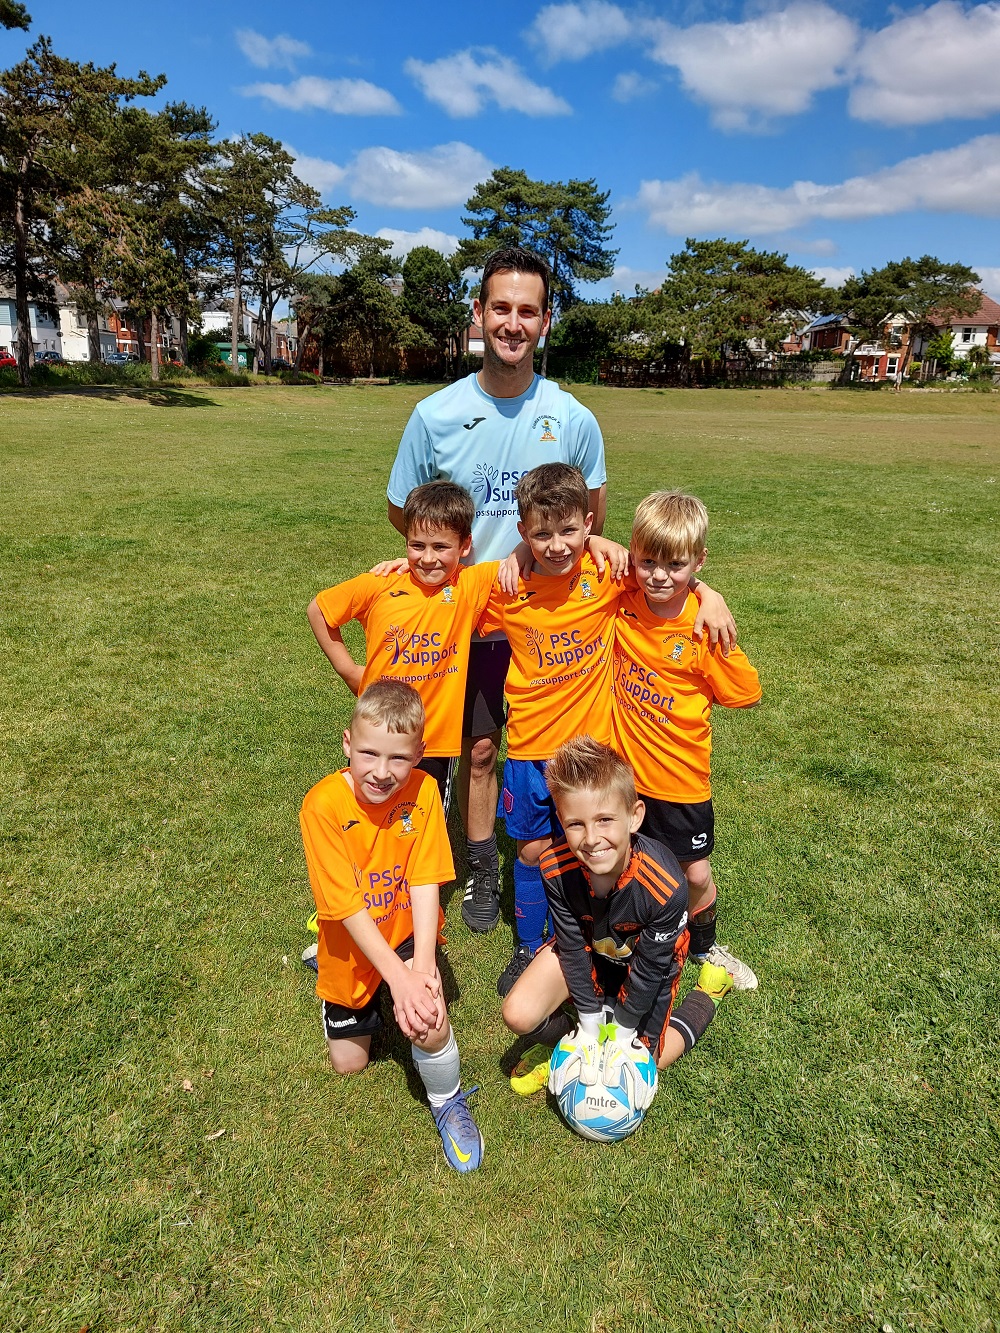 Local football coach hopes to raise £40,000 for charity with his team of under 8’s after lifesaving cancer treatment